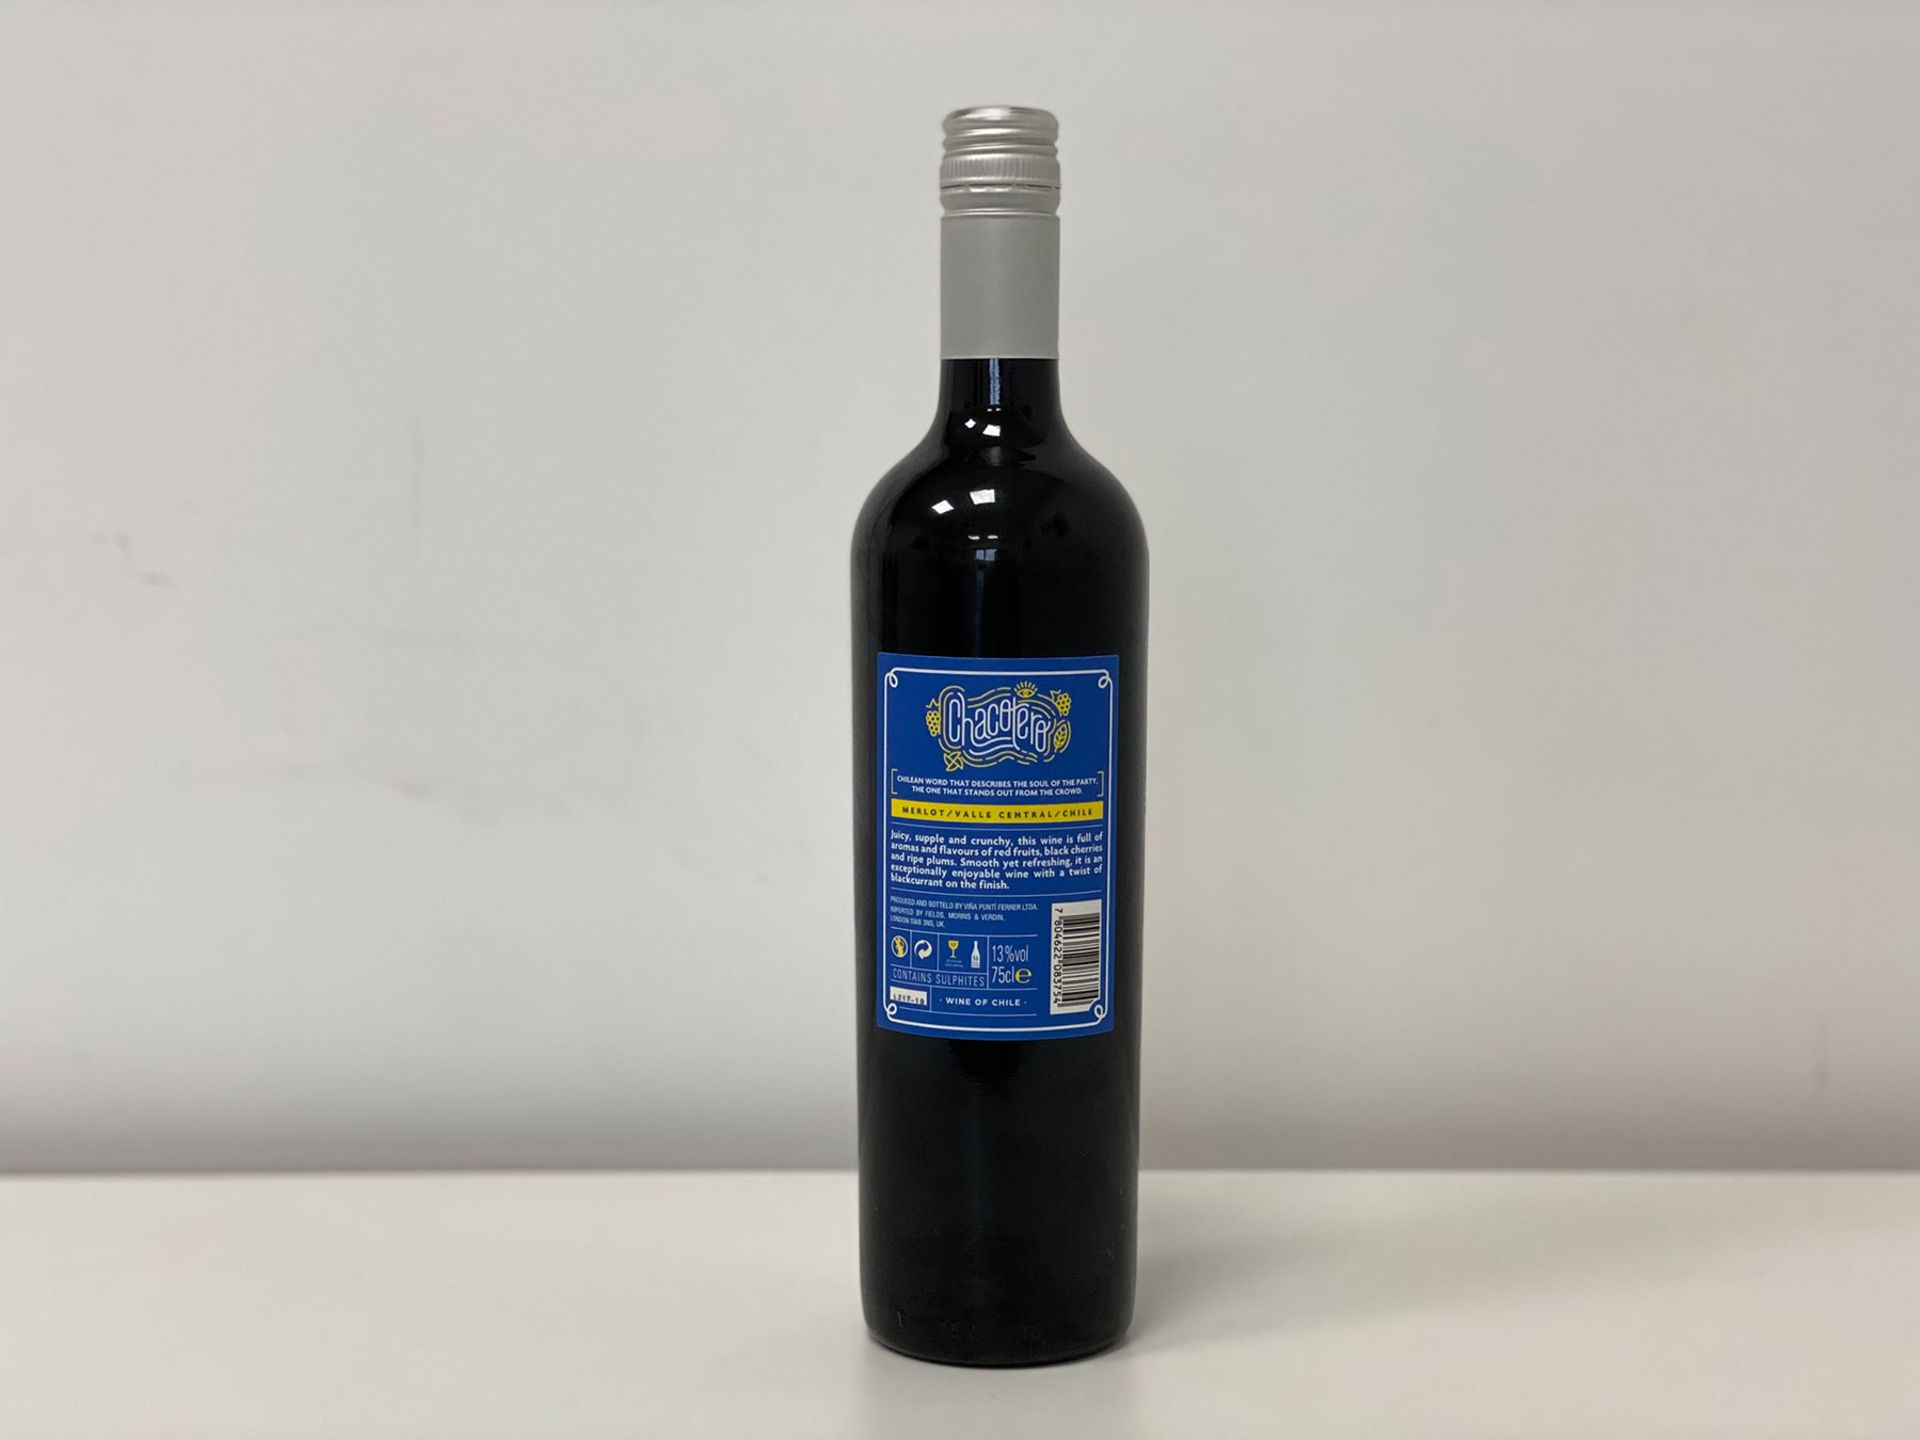 6 Bottles (1 Case) of Punti Ferrer - Chacotero Merlot - Central Valley - Image 2 of 2